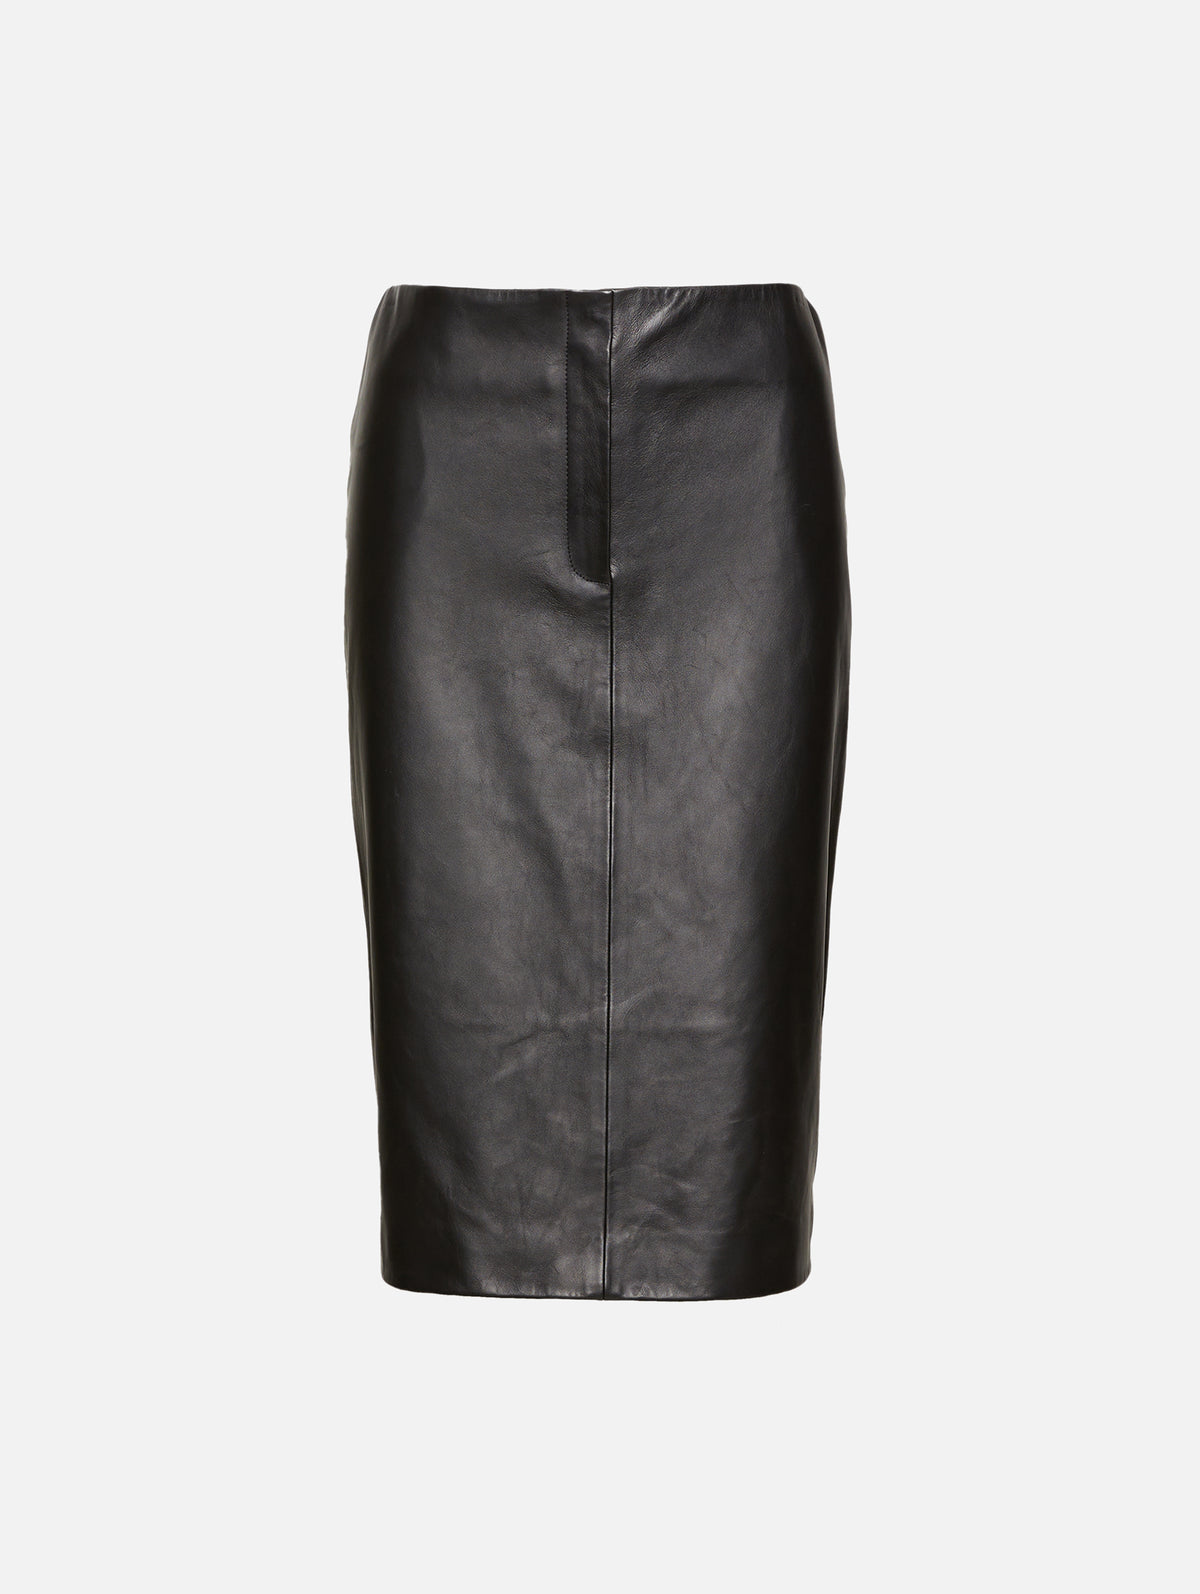 view 1 - Leather Skirt